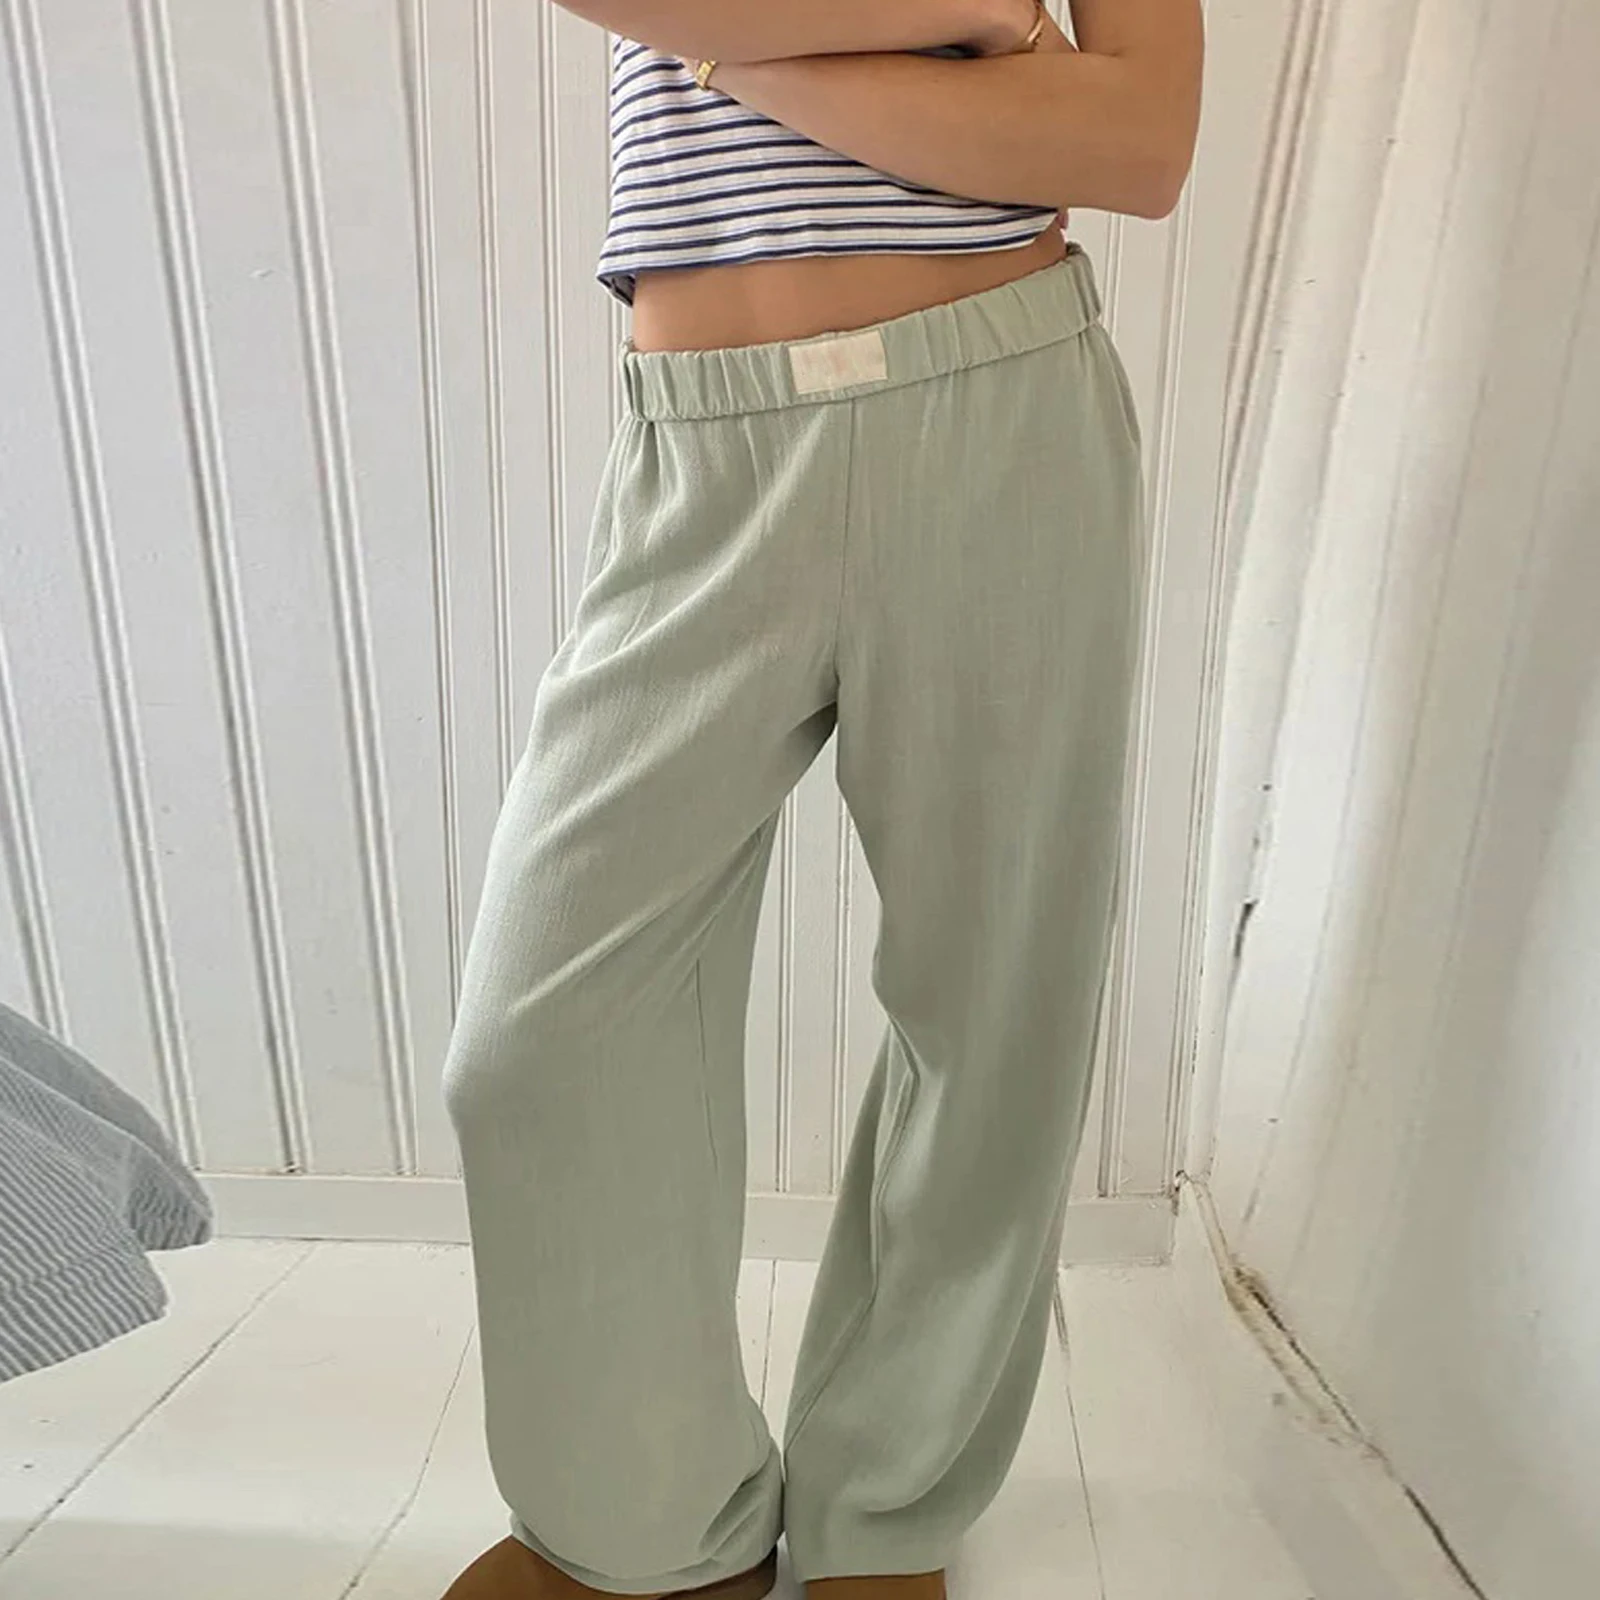 

Women Casual Baggy Pants Solid Color Elastic Waist Loose Trousers Harajuku Fashion Lounge Pants Grunge Streetwear for Daily Wear